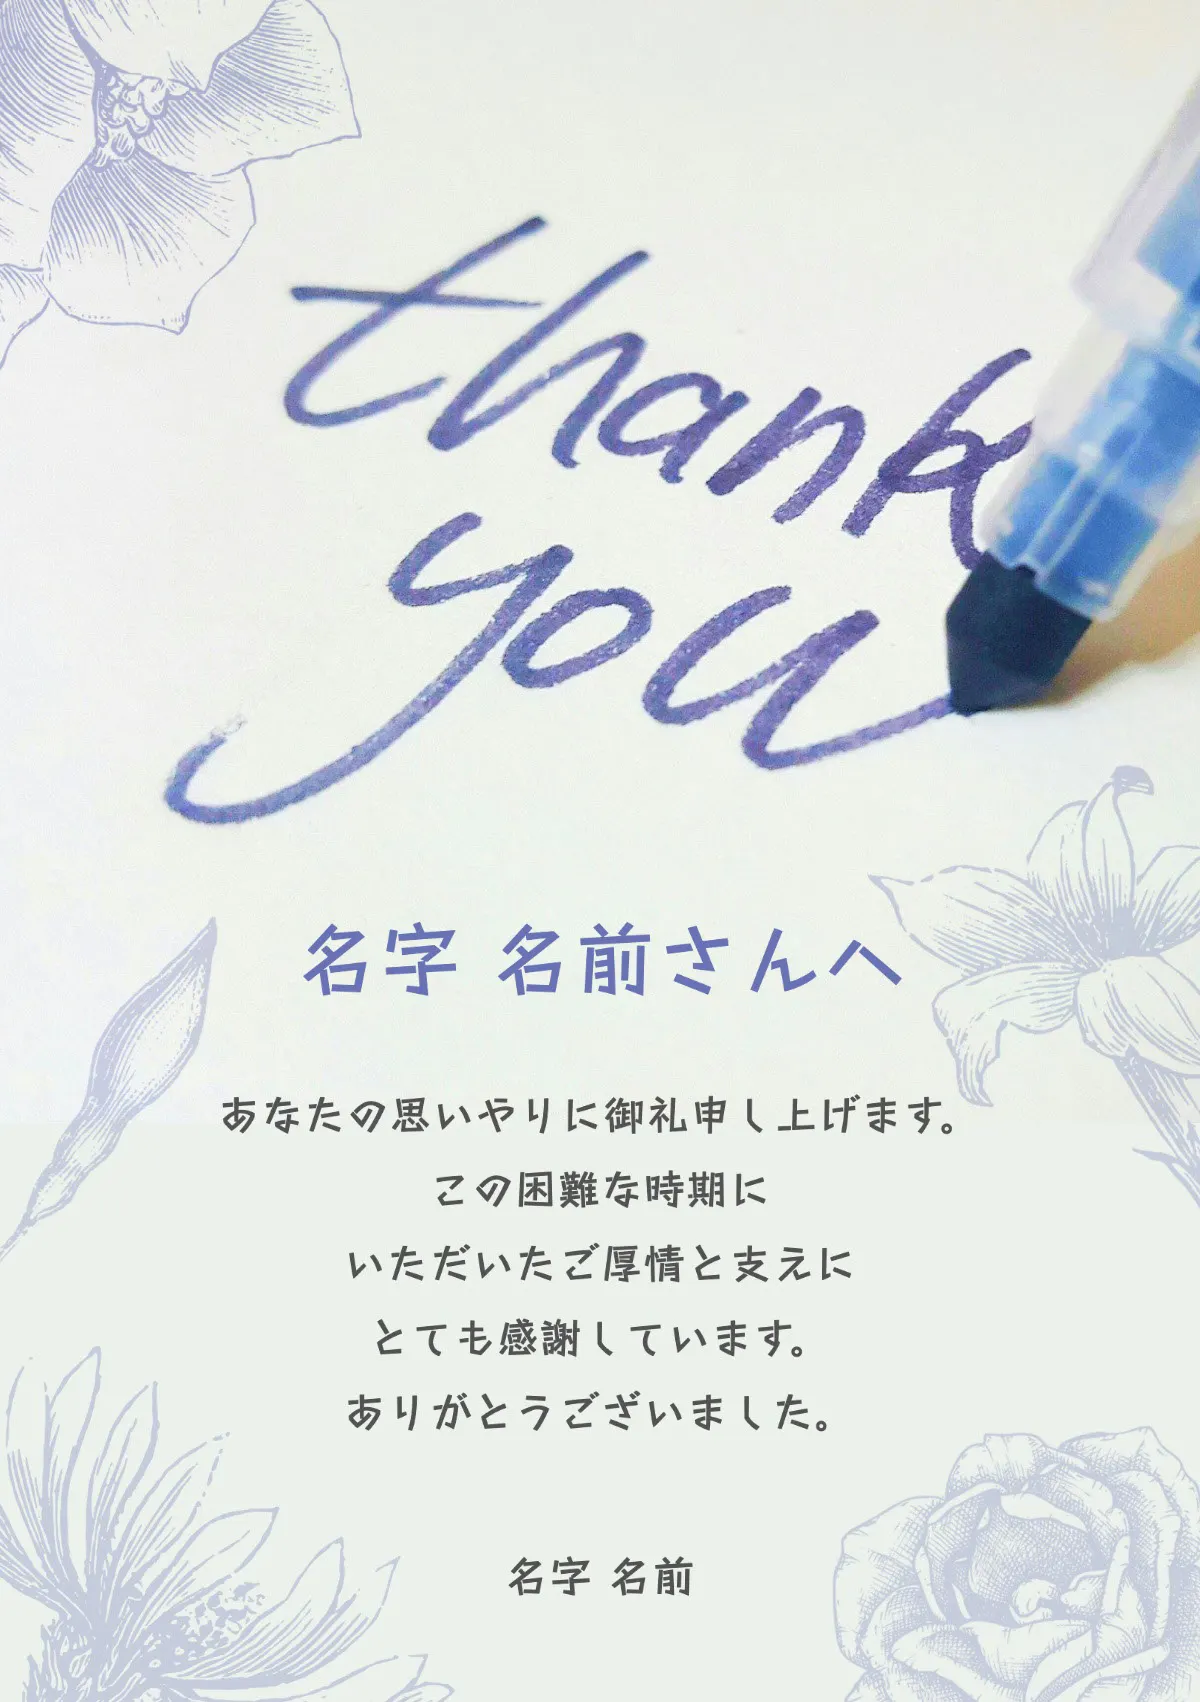 writing thank you message card